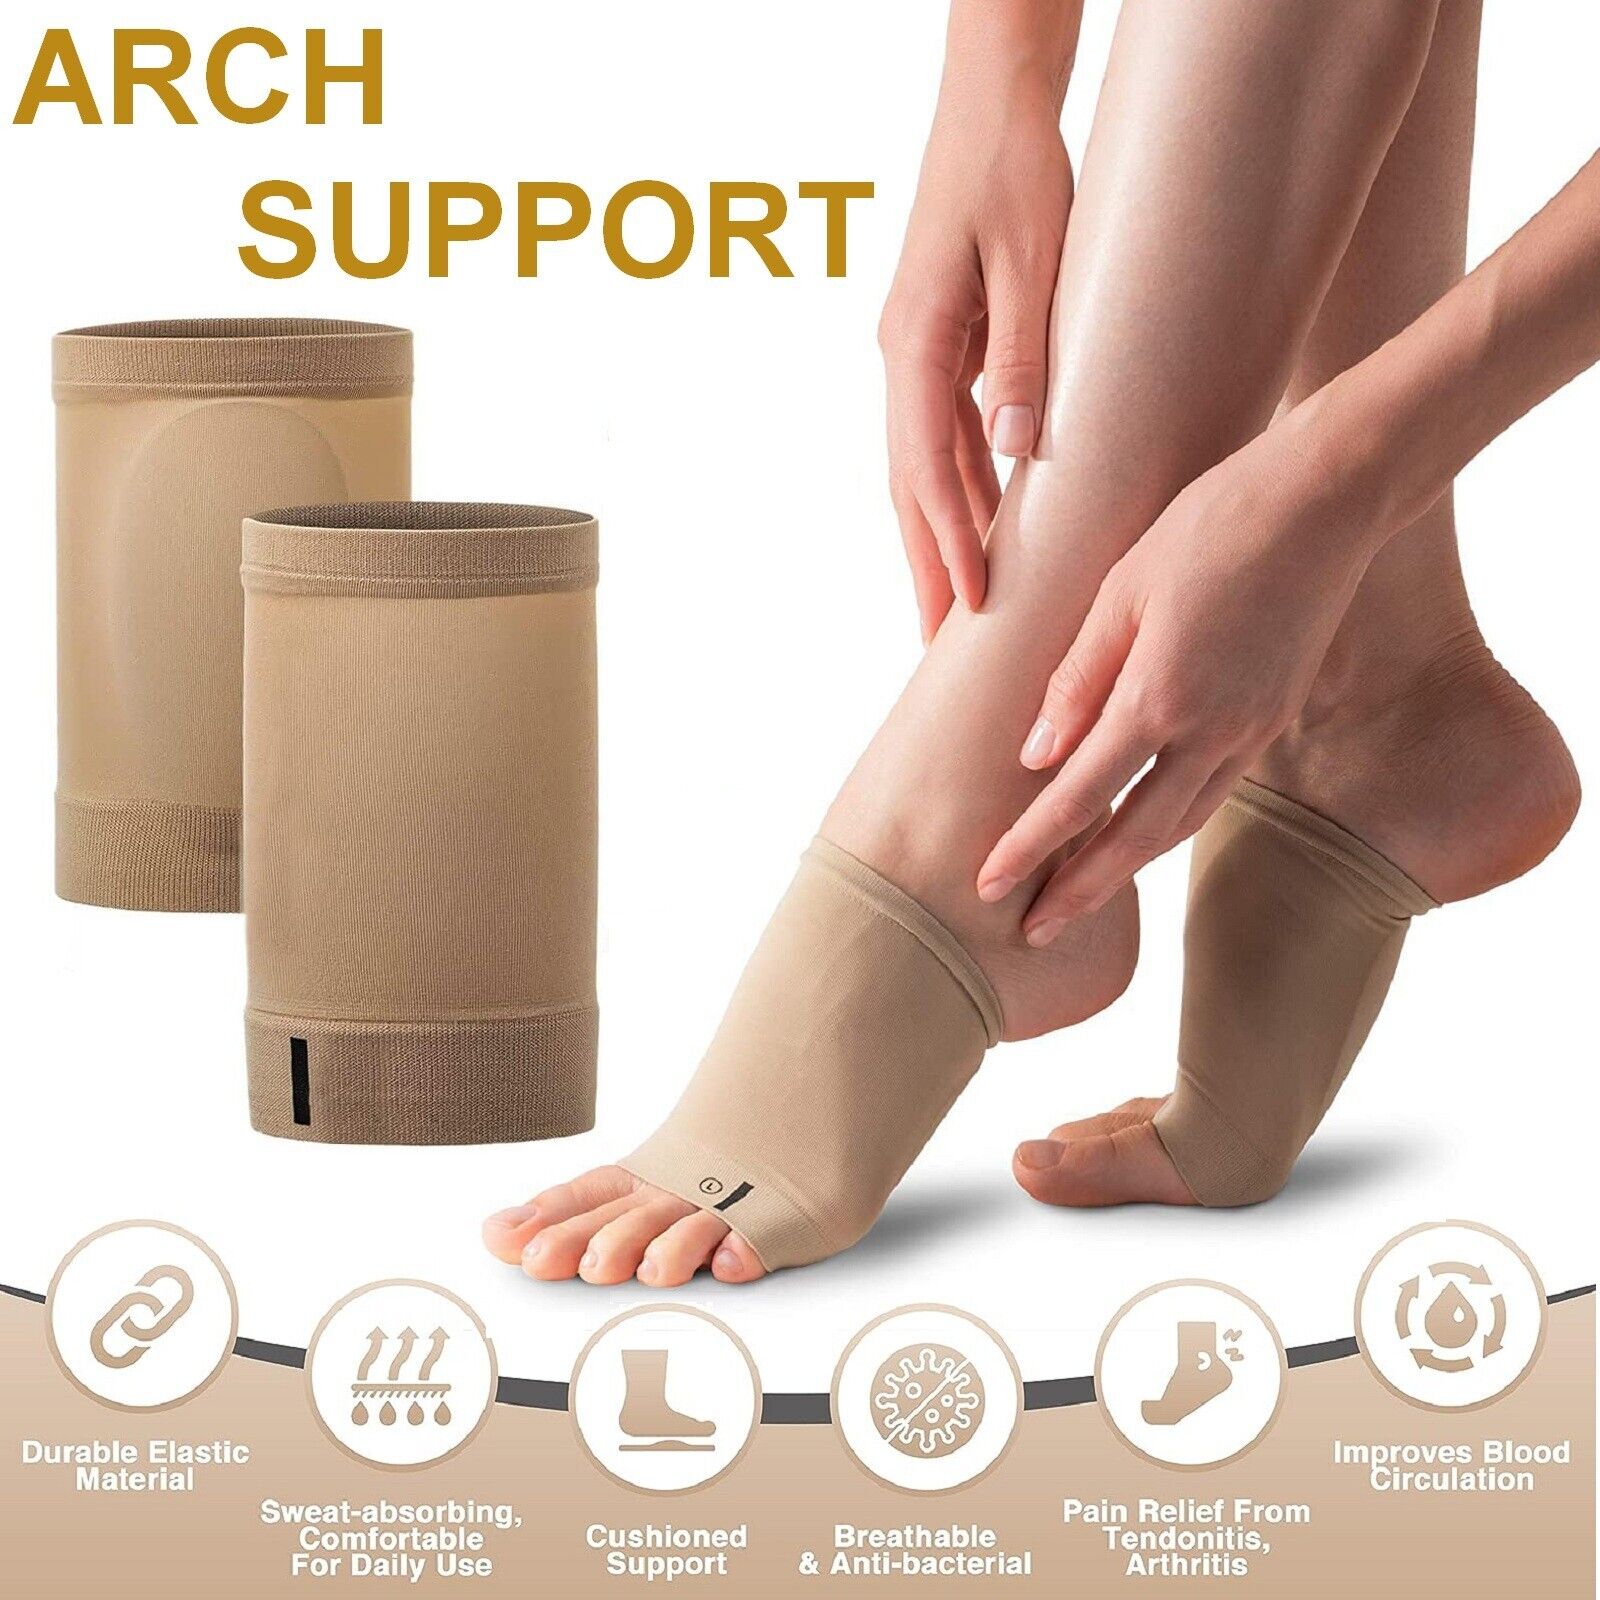 Arch Support Shoe Gel Insole Flat Feet Pad Pain Relief Plantar Fasciitis Foot